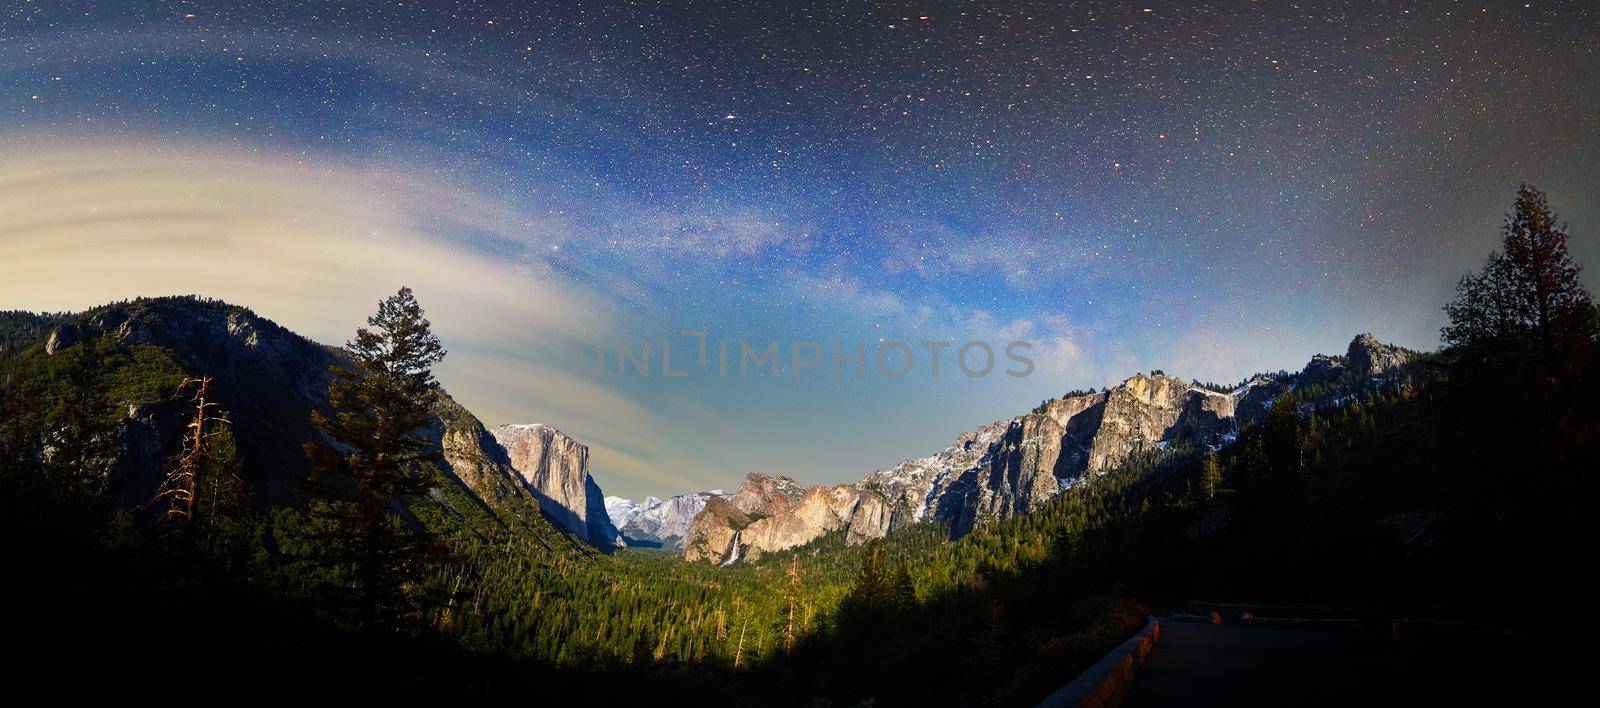 Yosemite near sunrise with milky way and clouds over valley by njproductions